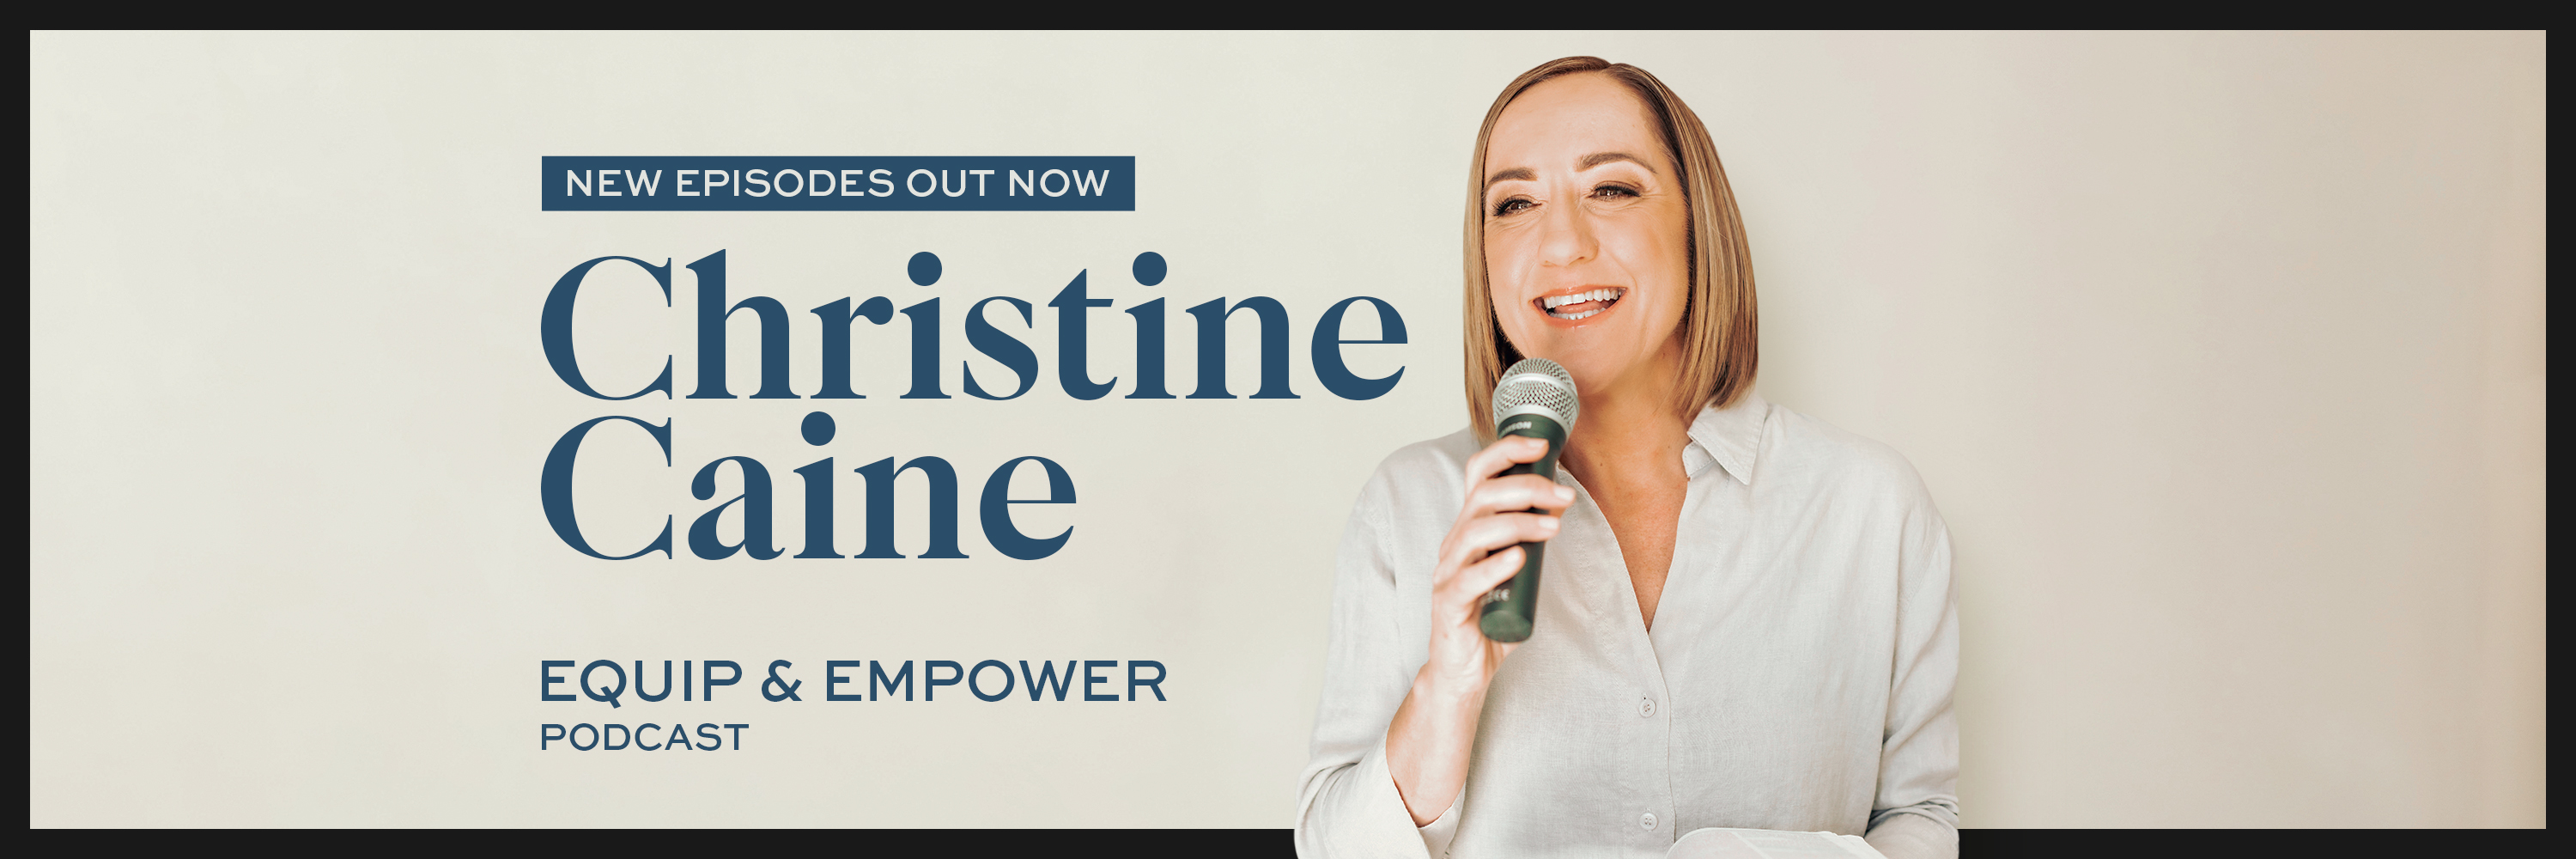 Equip and Empower with Christine Caine